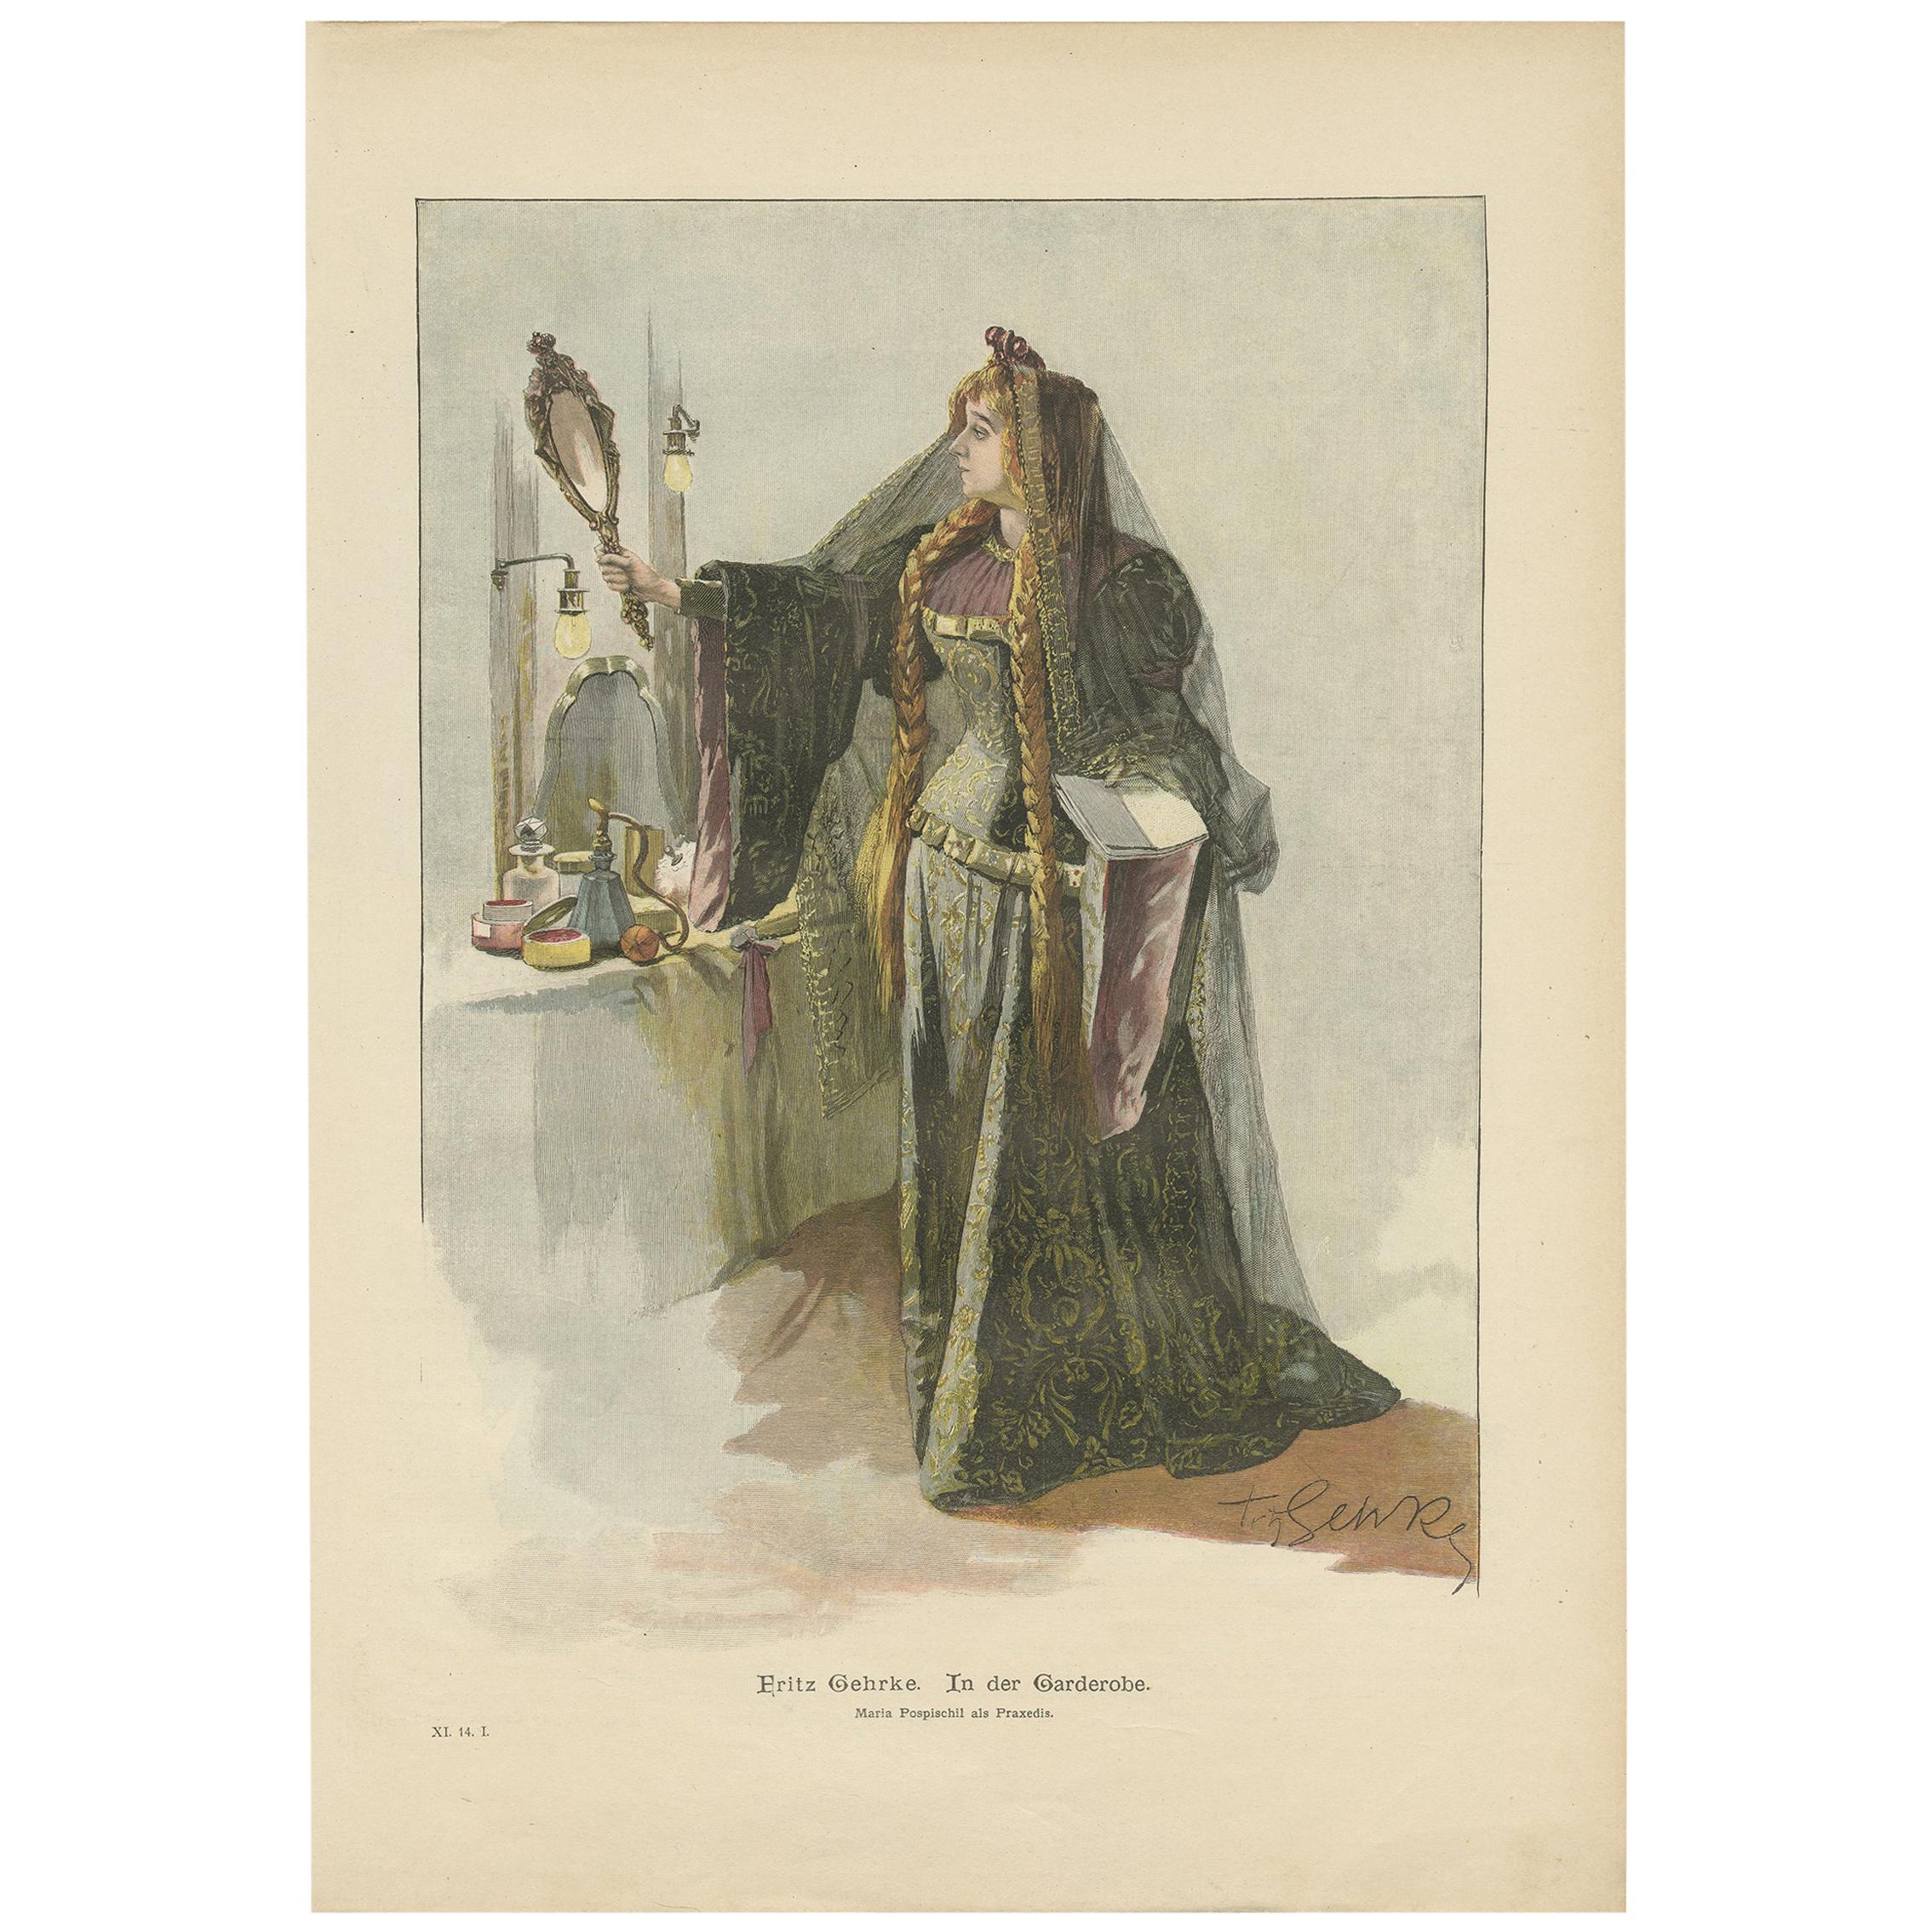 Antique Print of a Lady in a Dressing Room 'circa 1900'